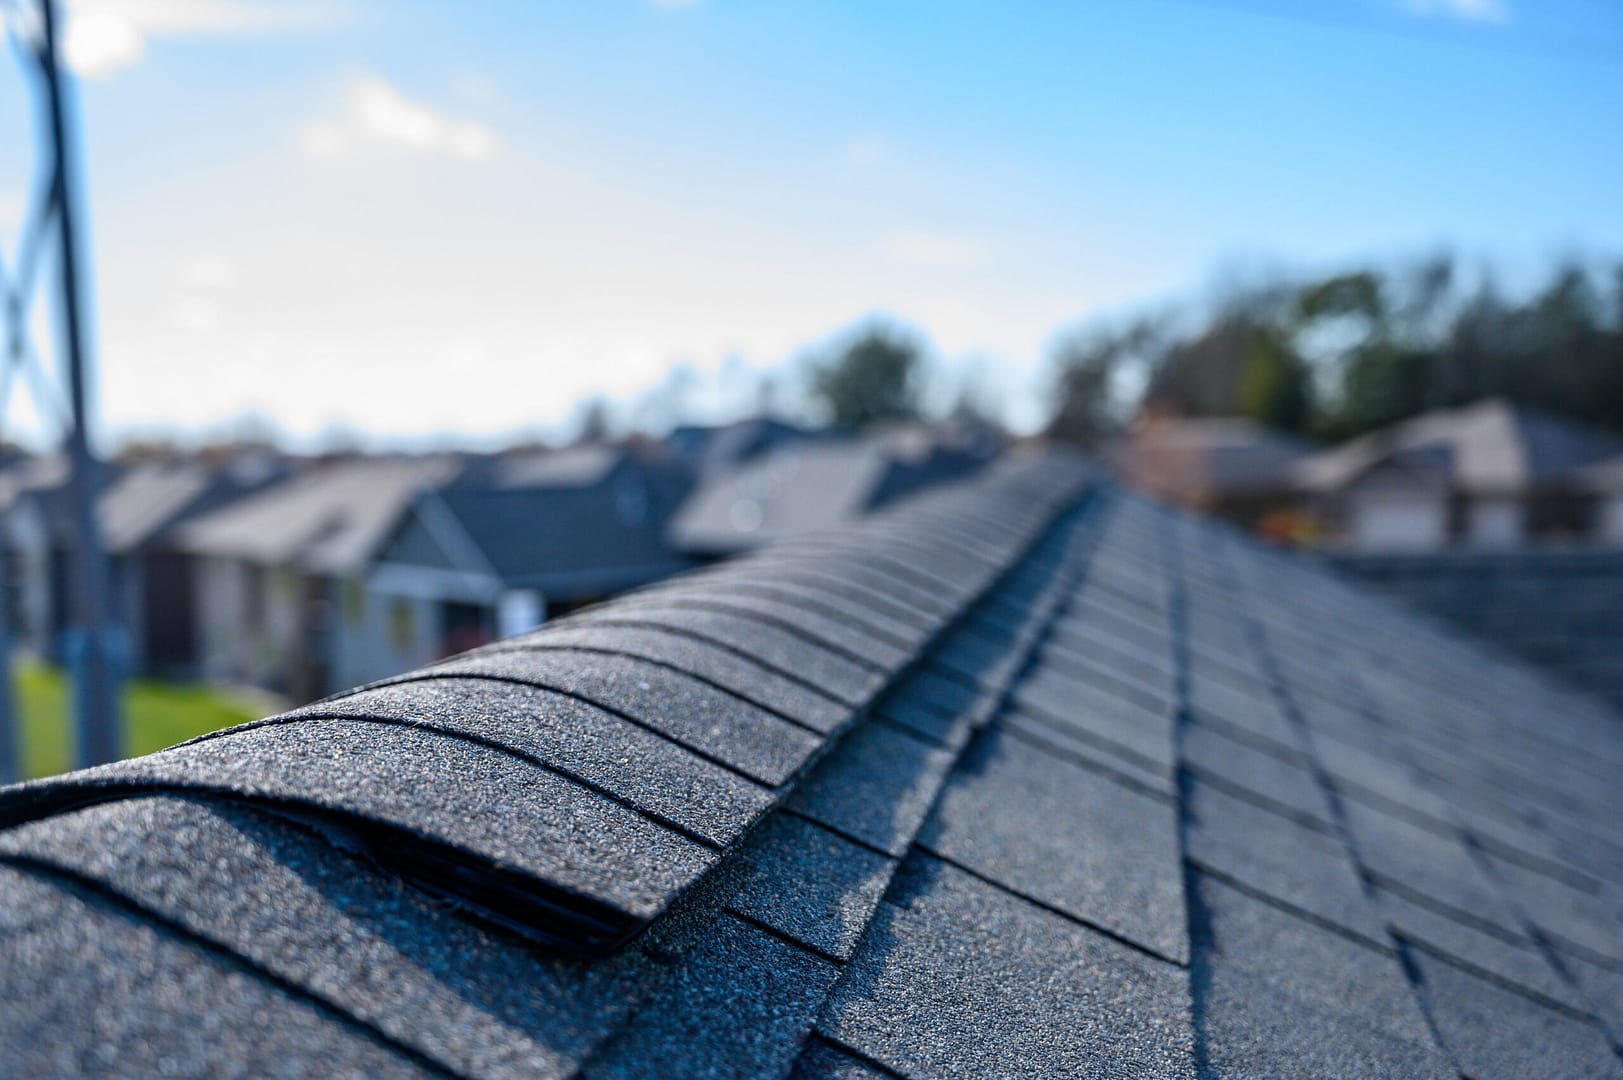 Roof covered in asphalt shingles with a neatly installed ridge cap for added durability and protection.